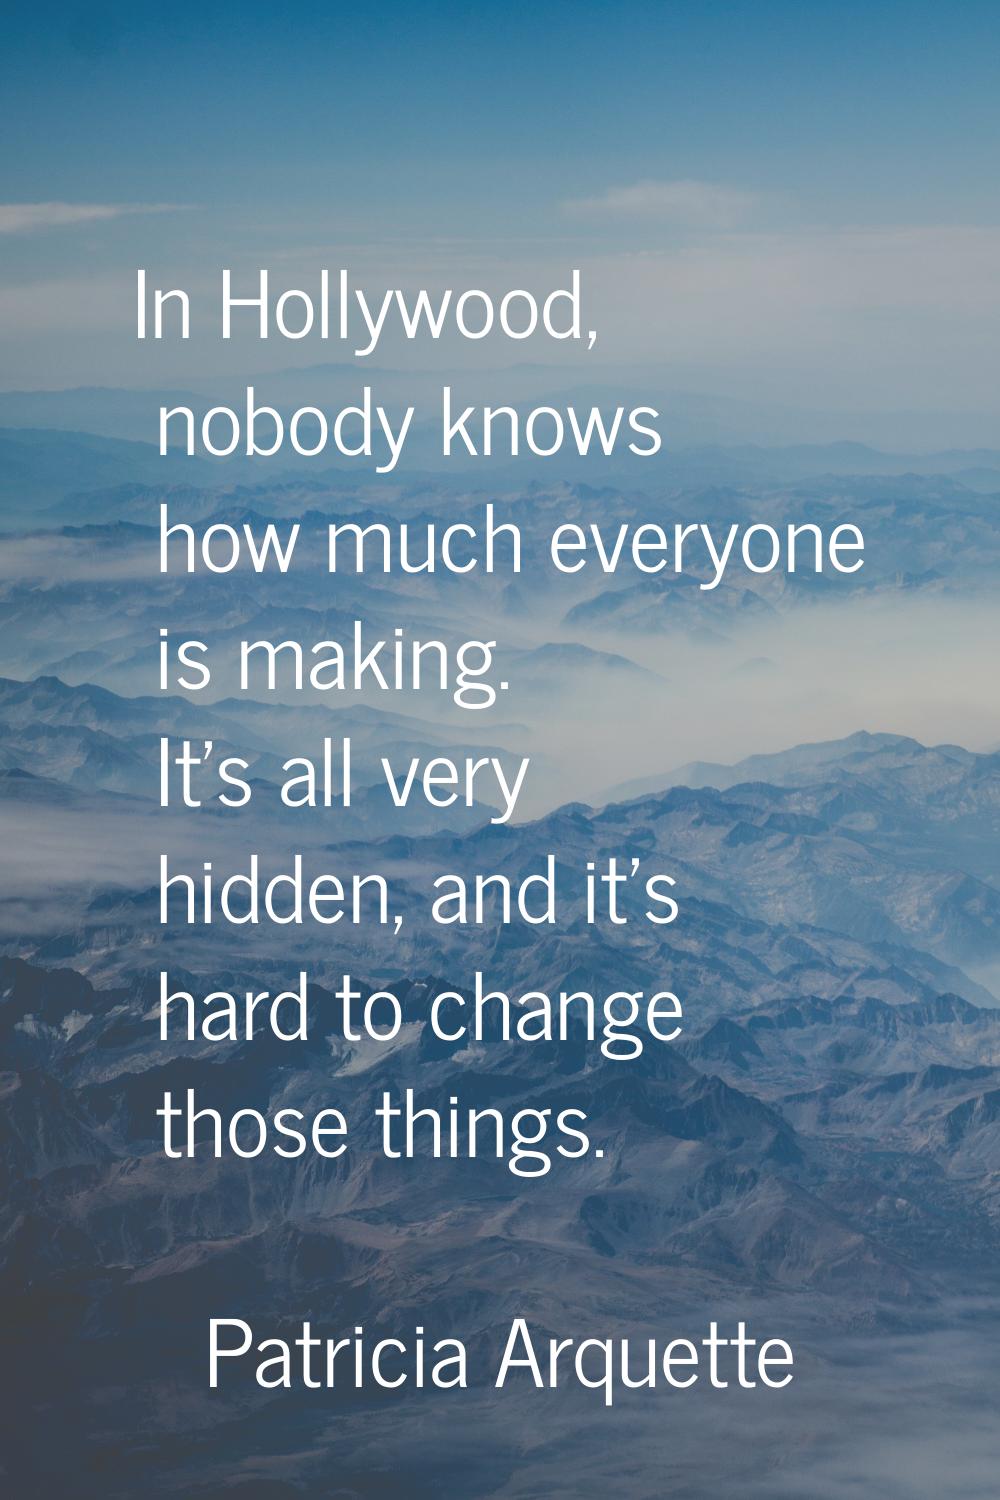 In Hollywood, nobody knows how much everyone is making. It's all very hidden, and it's hard to chan